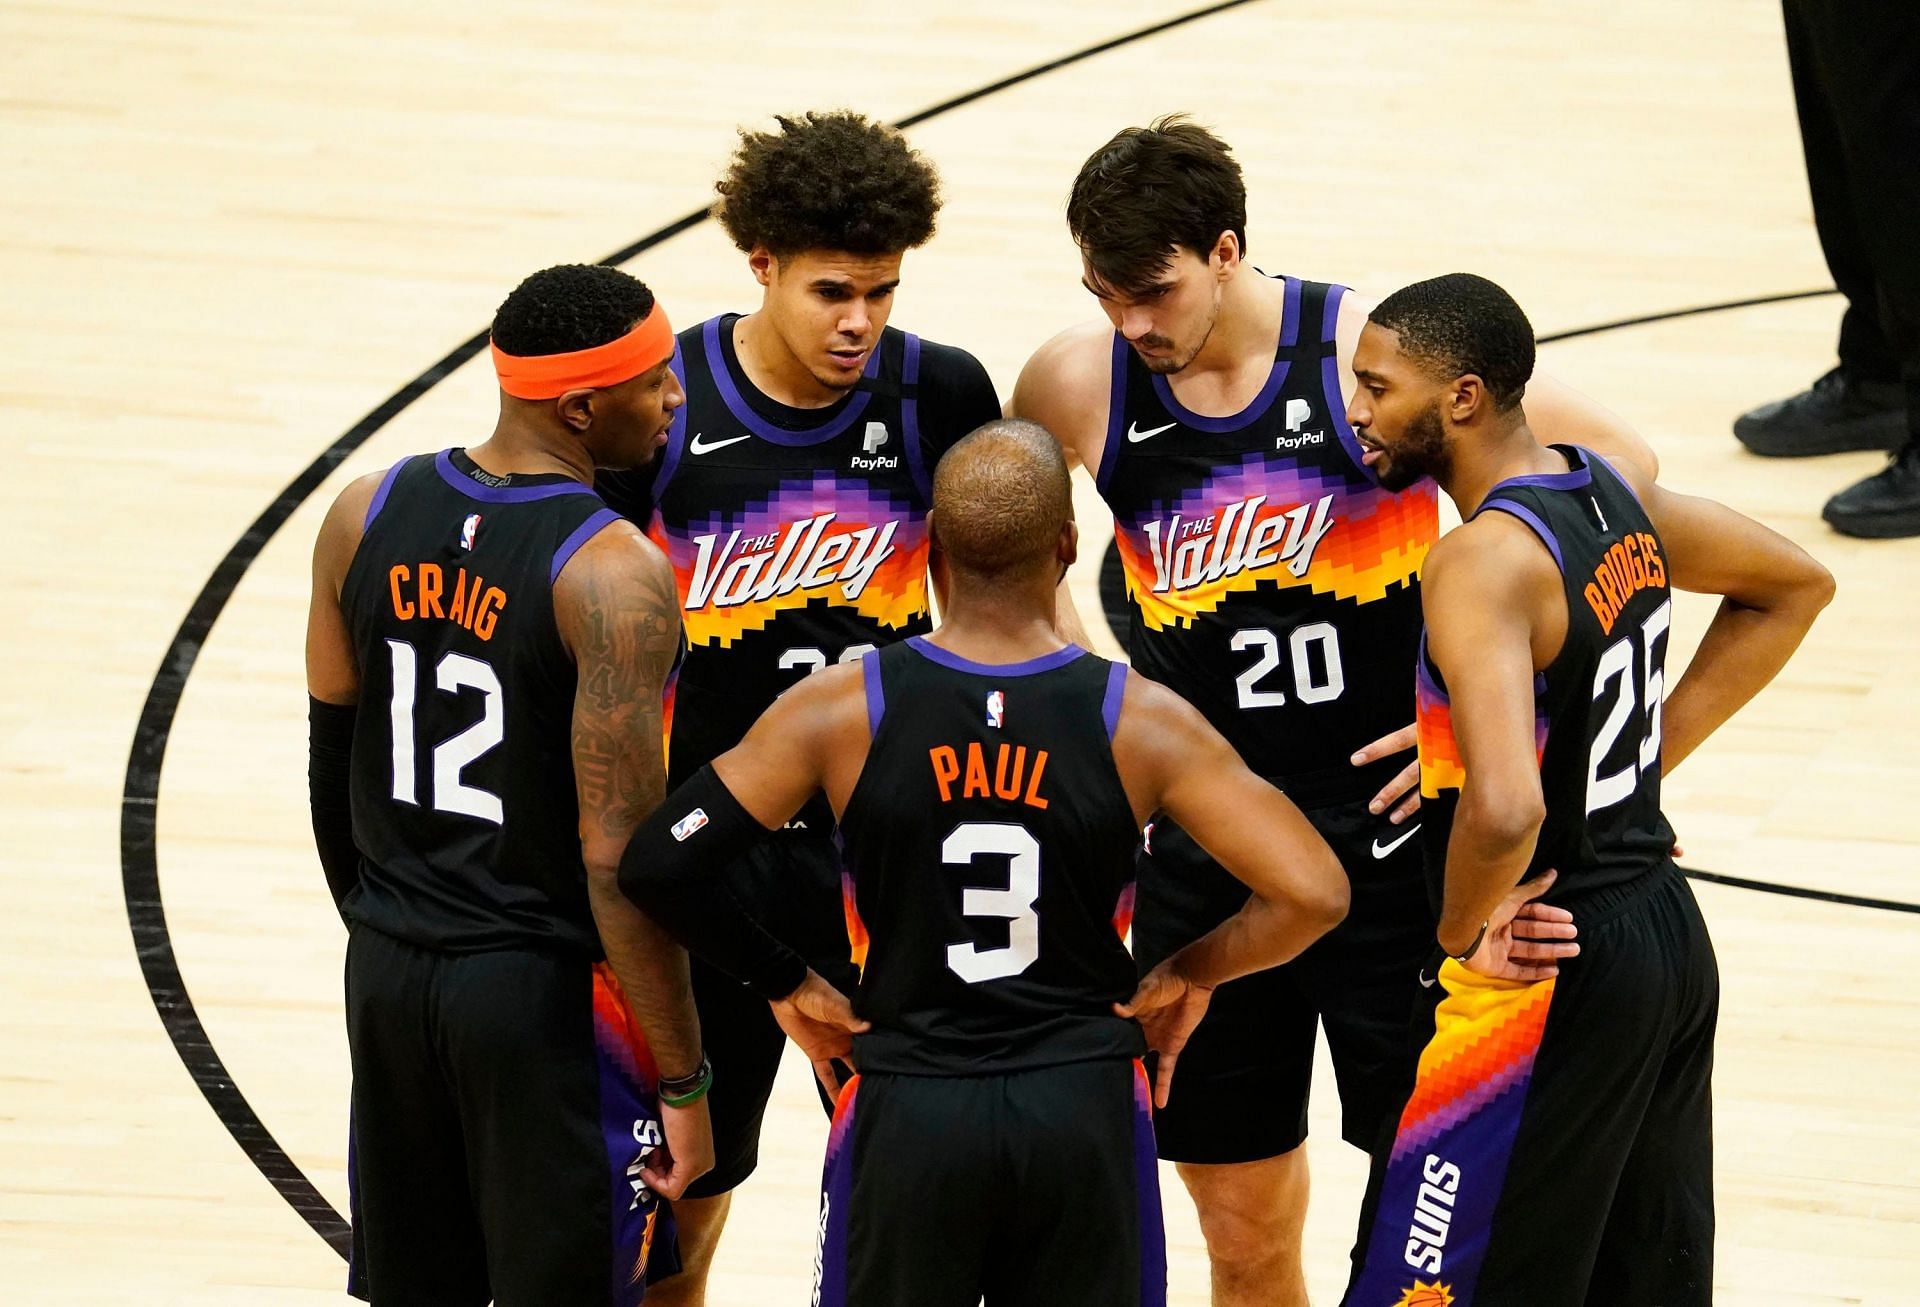 The Phoenix Suns will hope to build another winning streak starting with the game against the young and resilient San Antonio Spurs. [Photo: AZCentral]